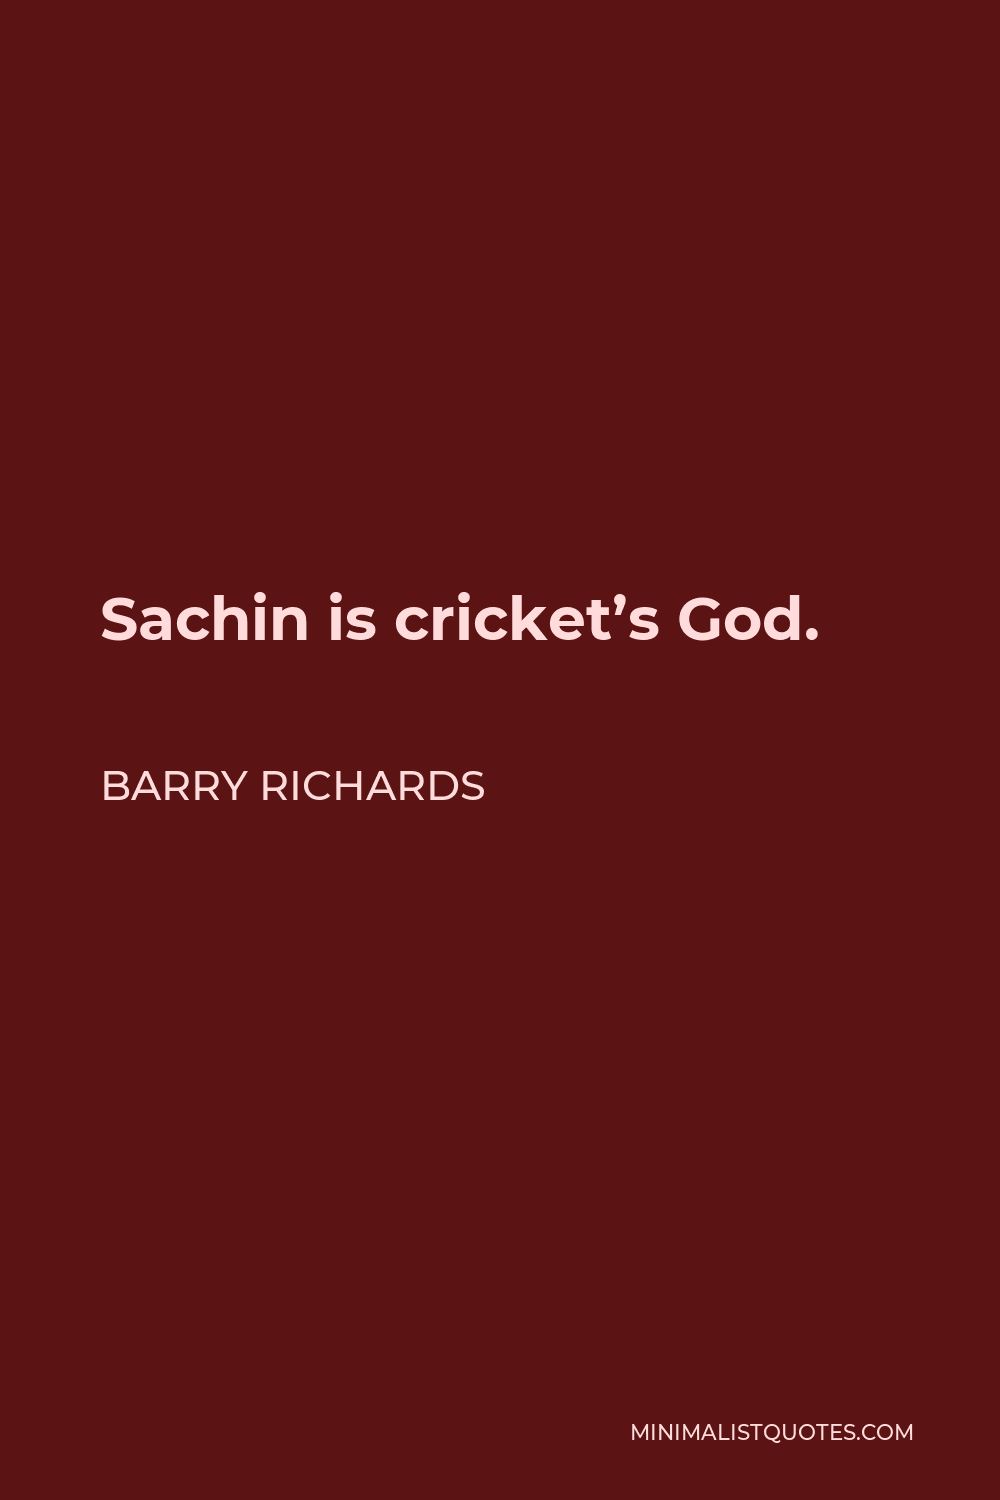 Barry Richards Quote - Sachin is cricket’s God.